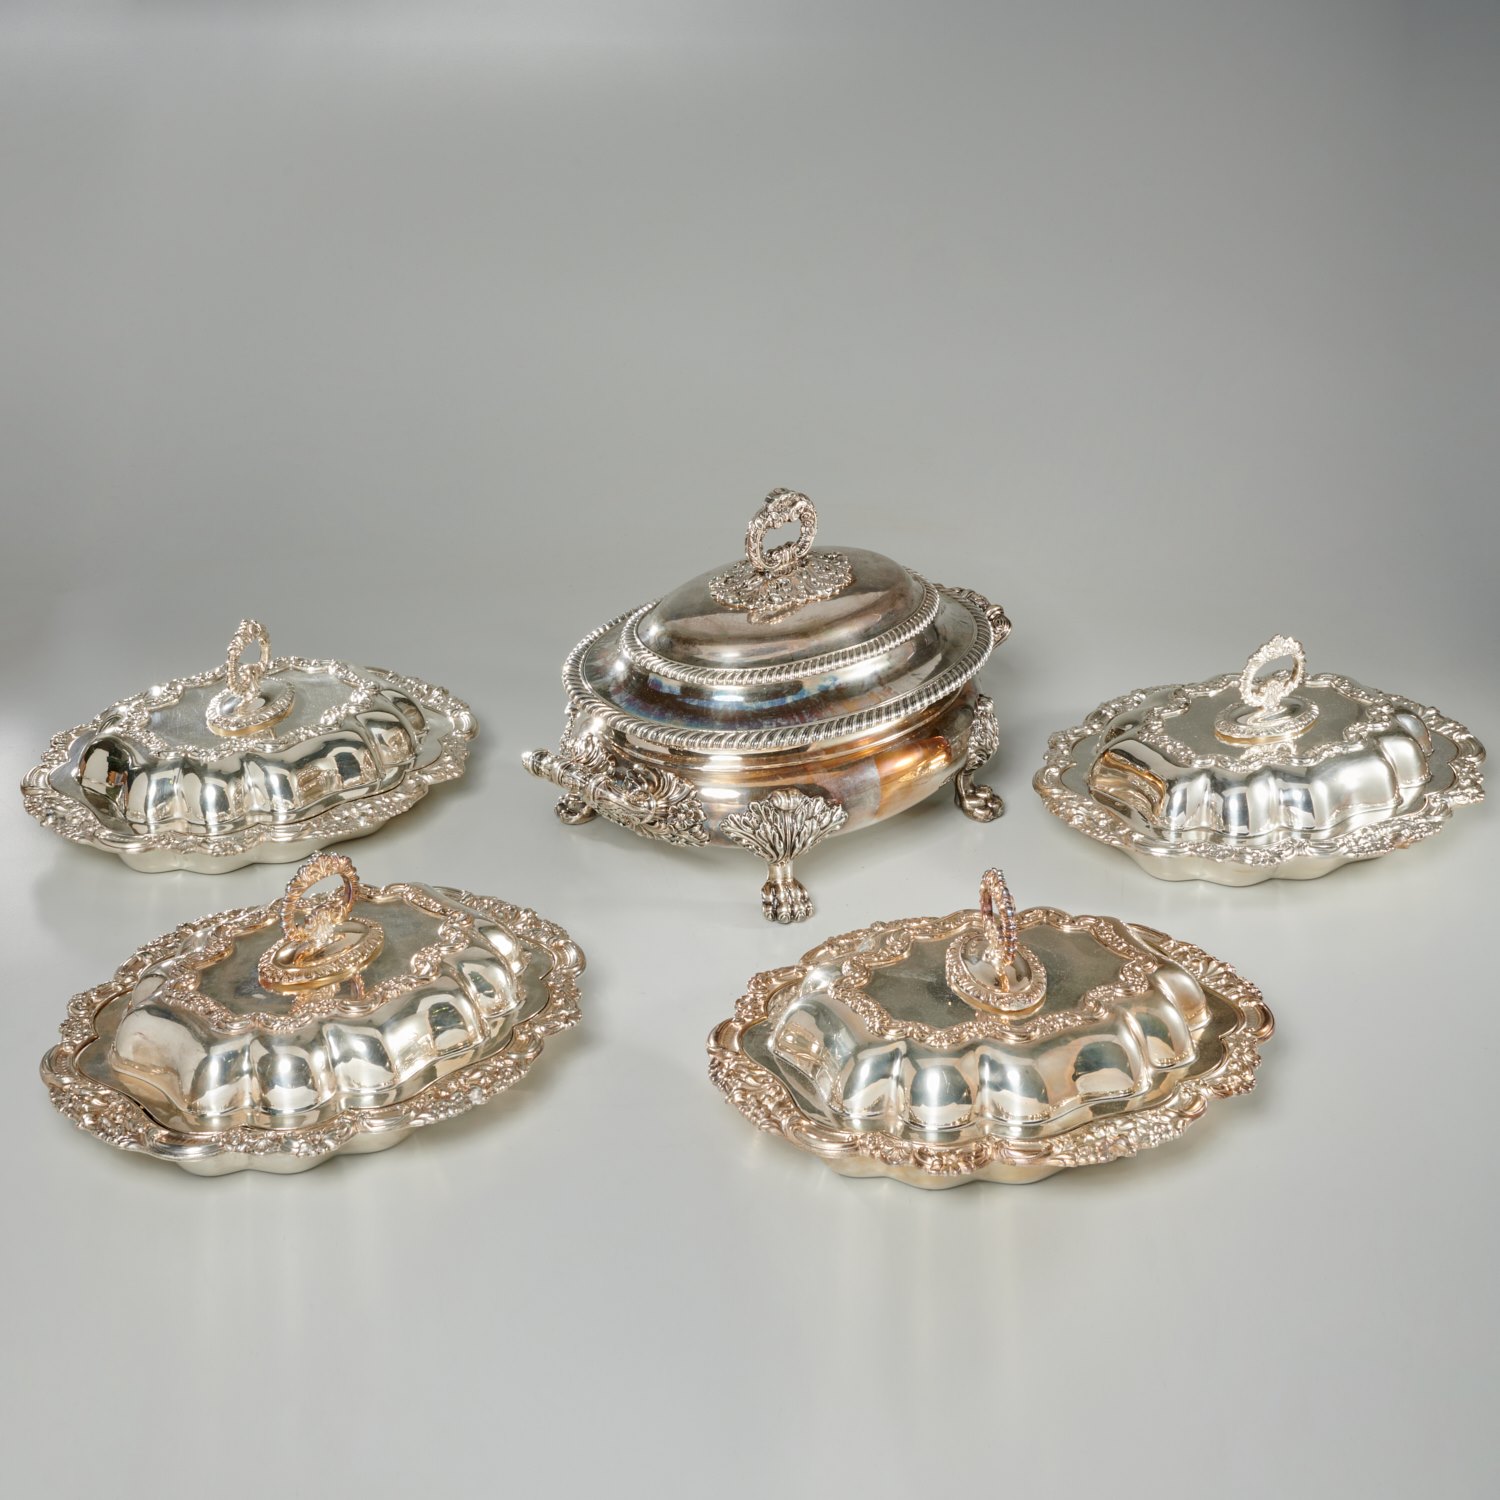 (5) ANTIQUE ENGLISH SILVER PLATED SERVING